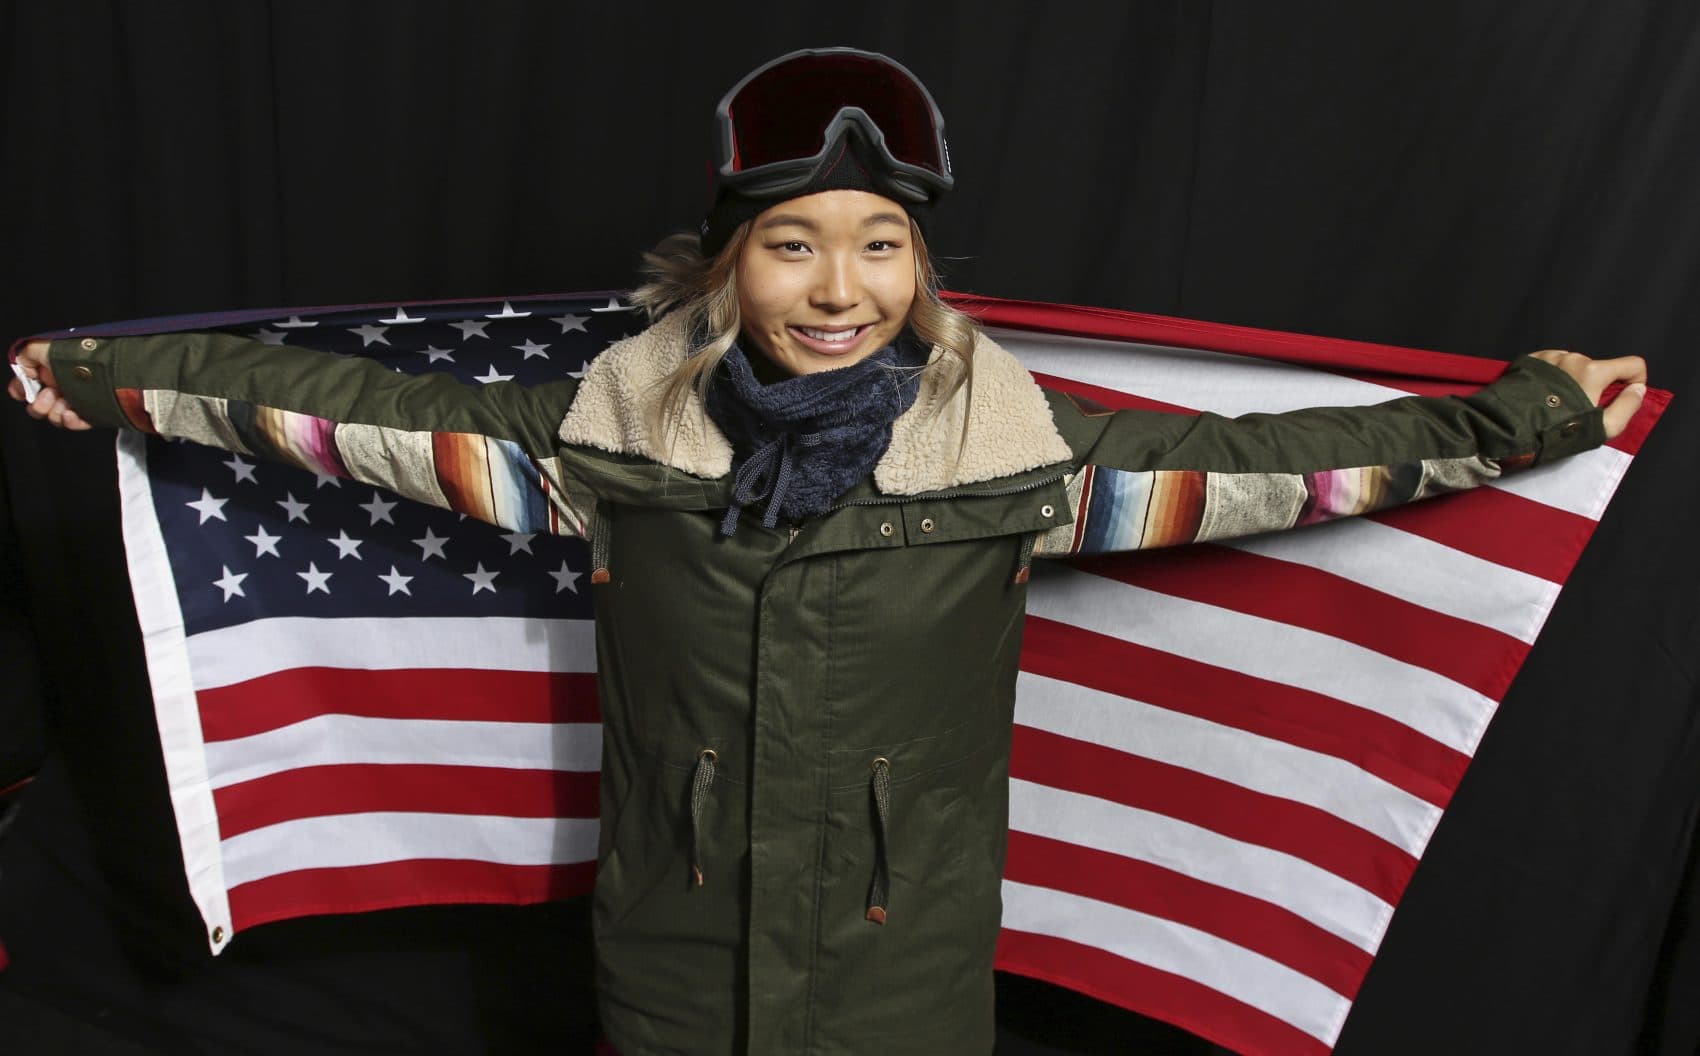 United States Olympic Winter Games Snowboarder Chloe Kim poses for a portrait at the 2017 Team USA Media Summit Monday, Sept. 25, 2017, in Park City, Utah. (Rick Bowmer/AP)